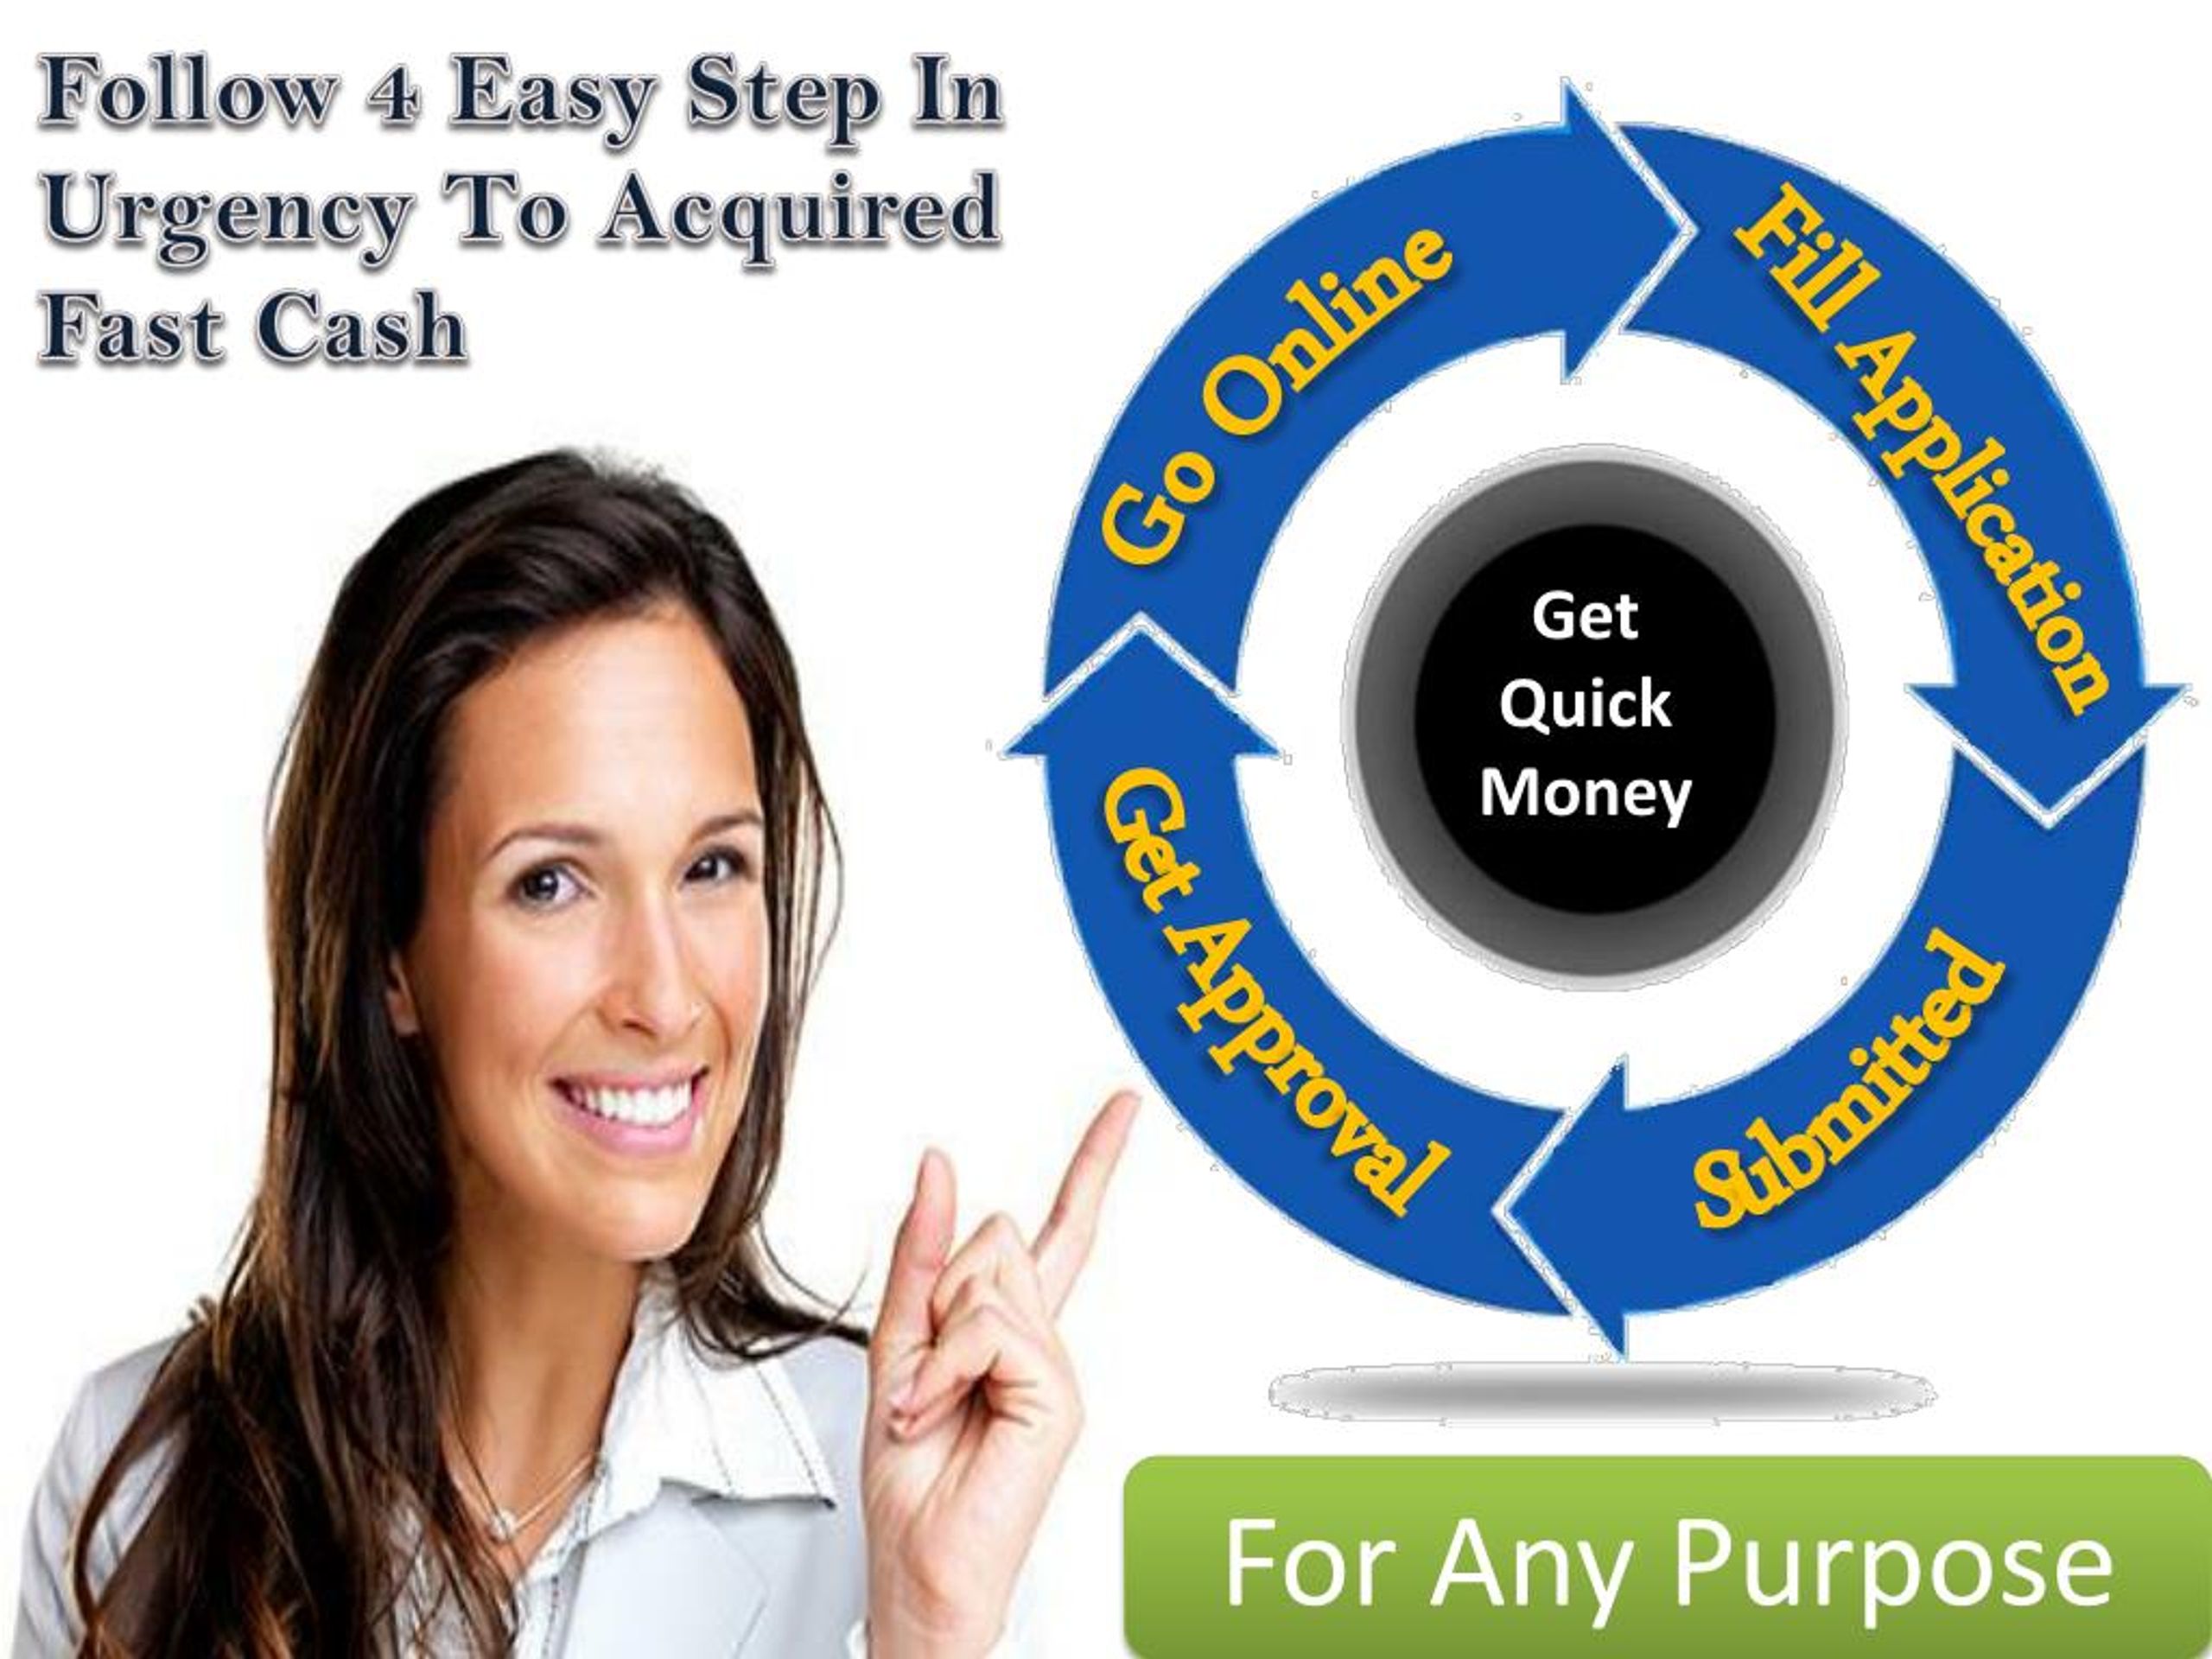 payday loans Greenfield Ohio